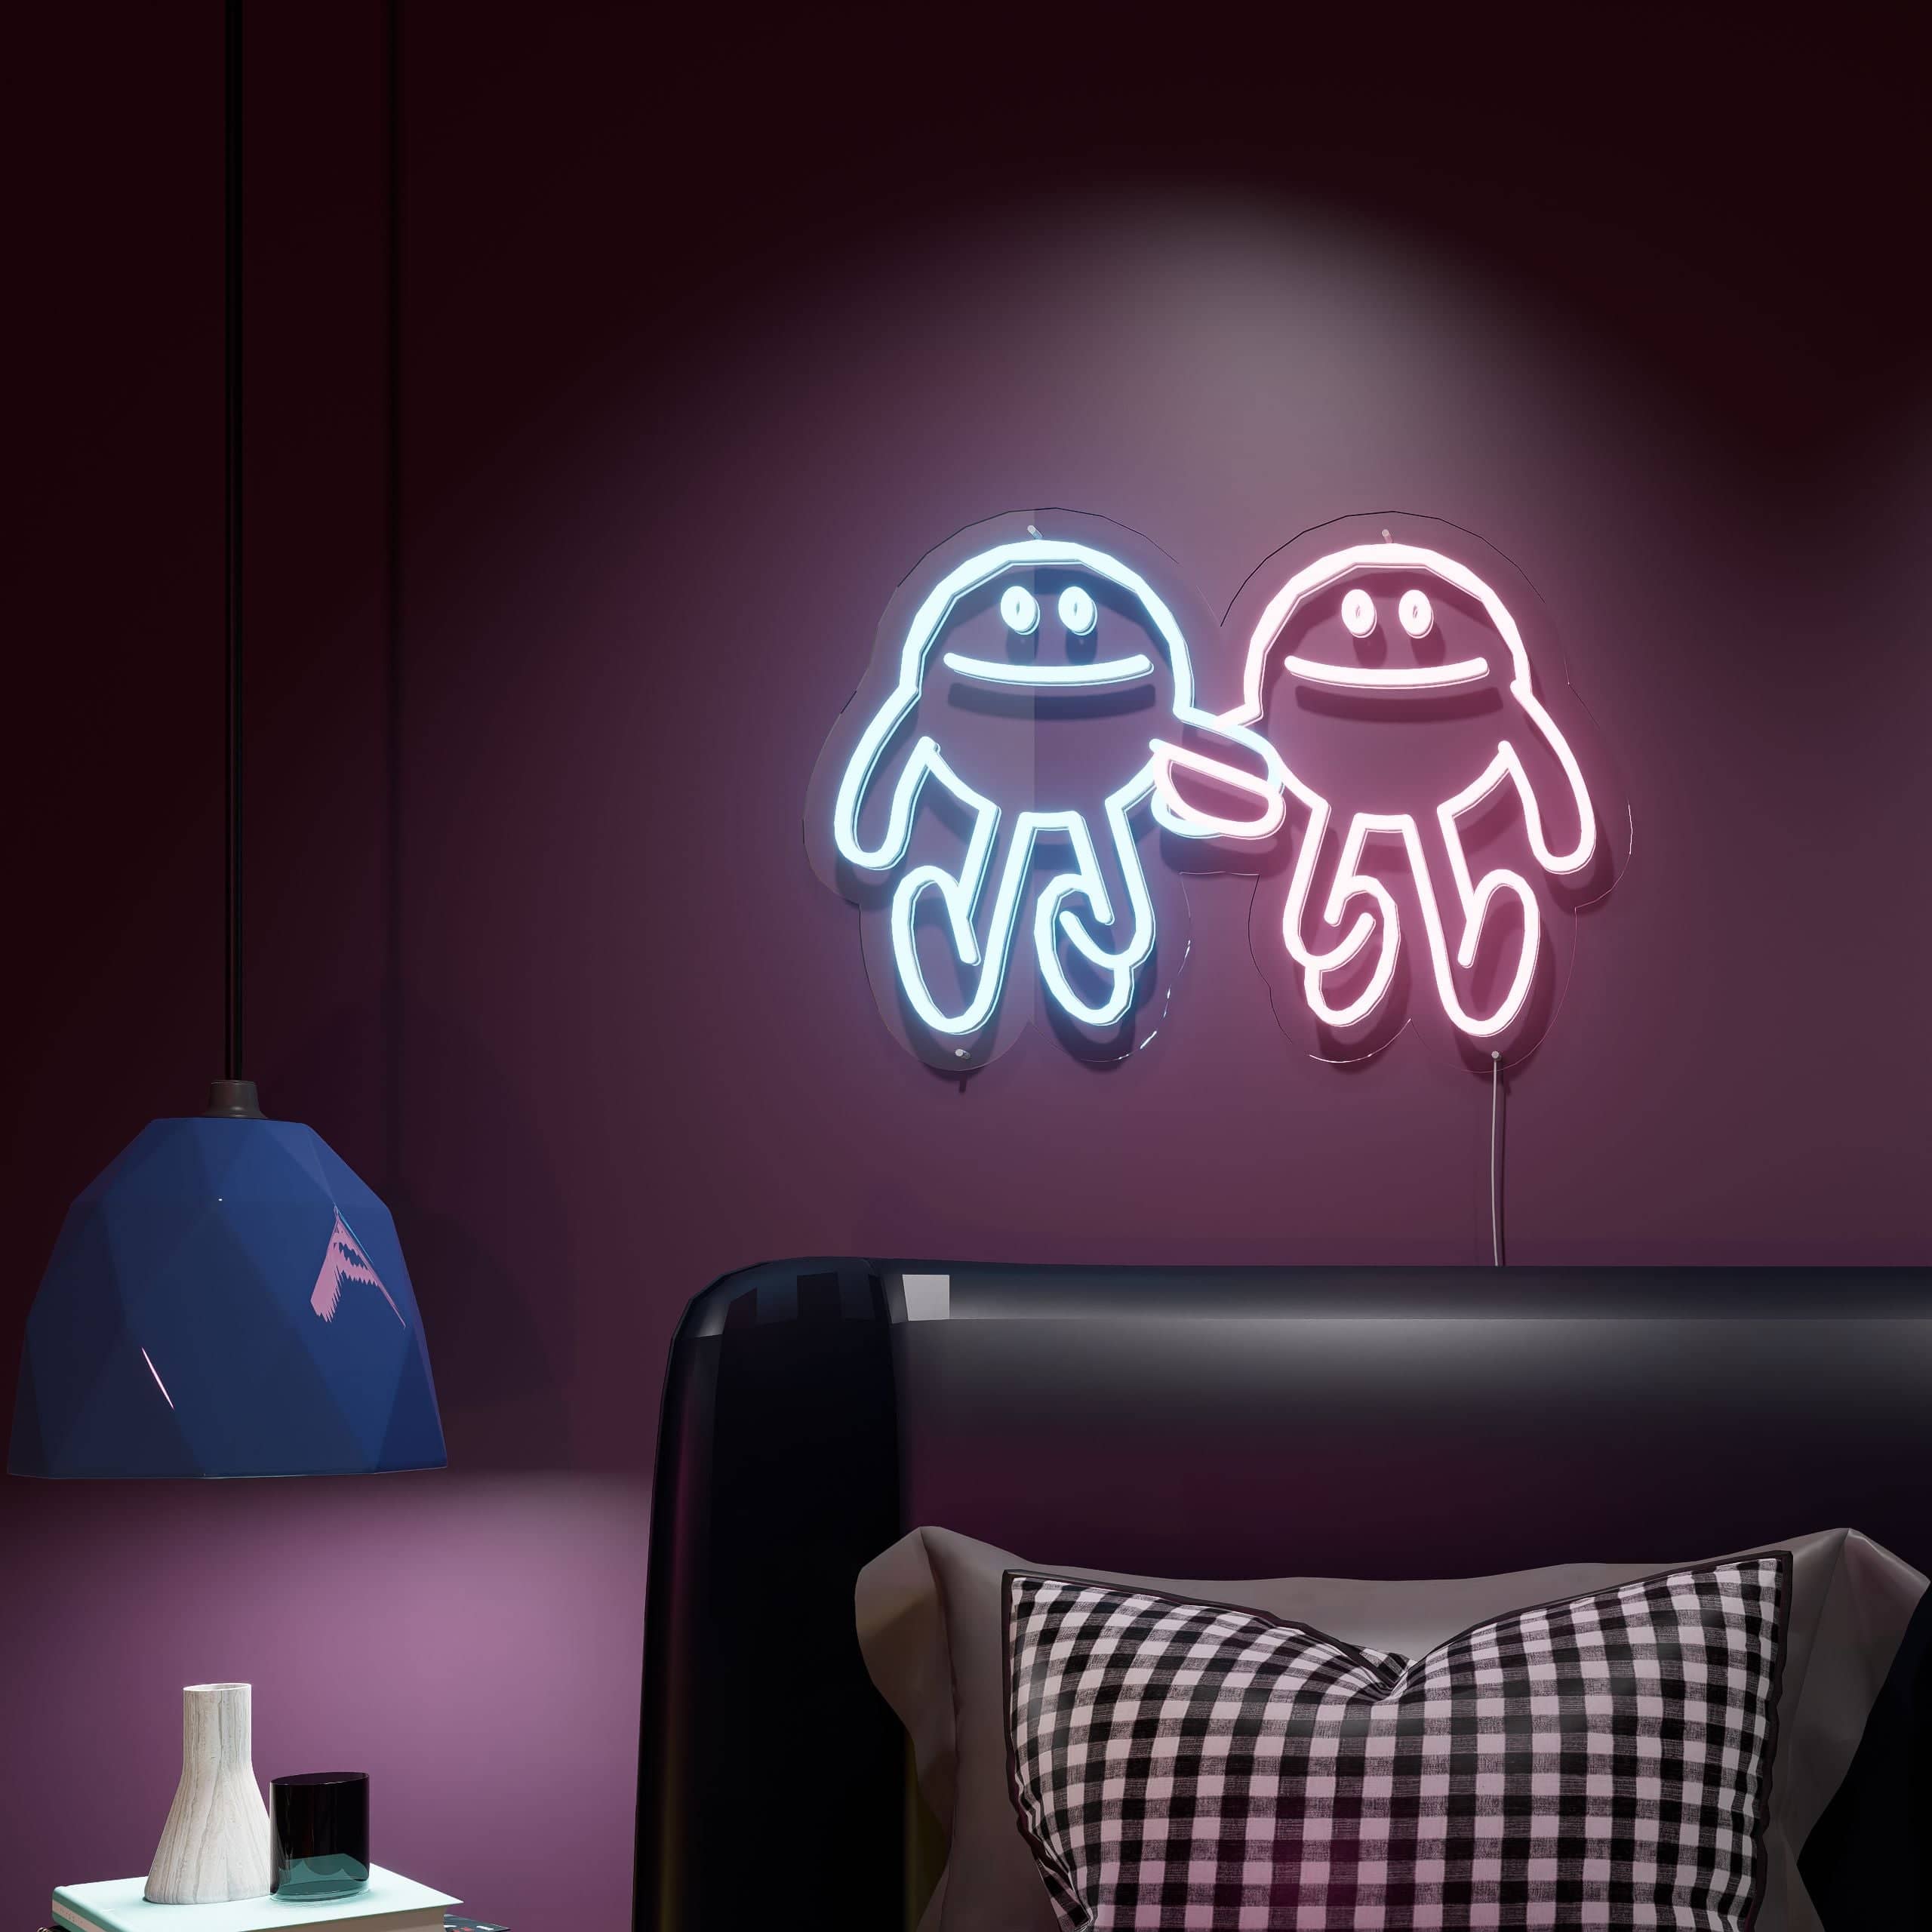 Living room Neon Signs featuring playful glowing characters